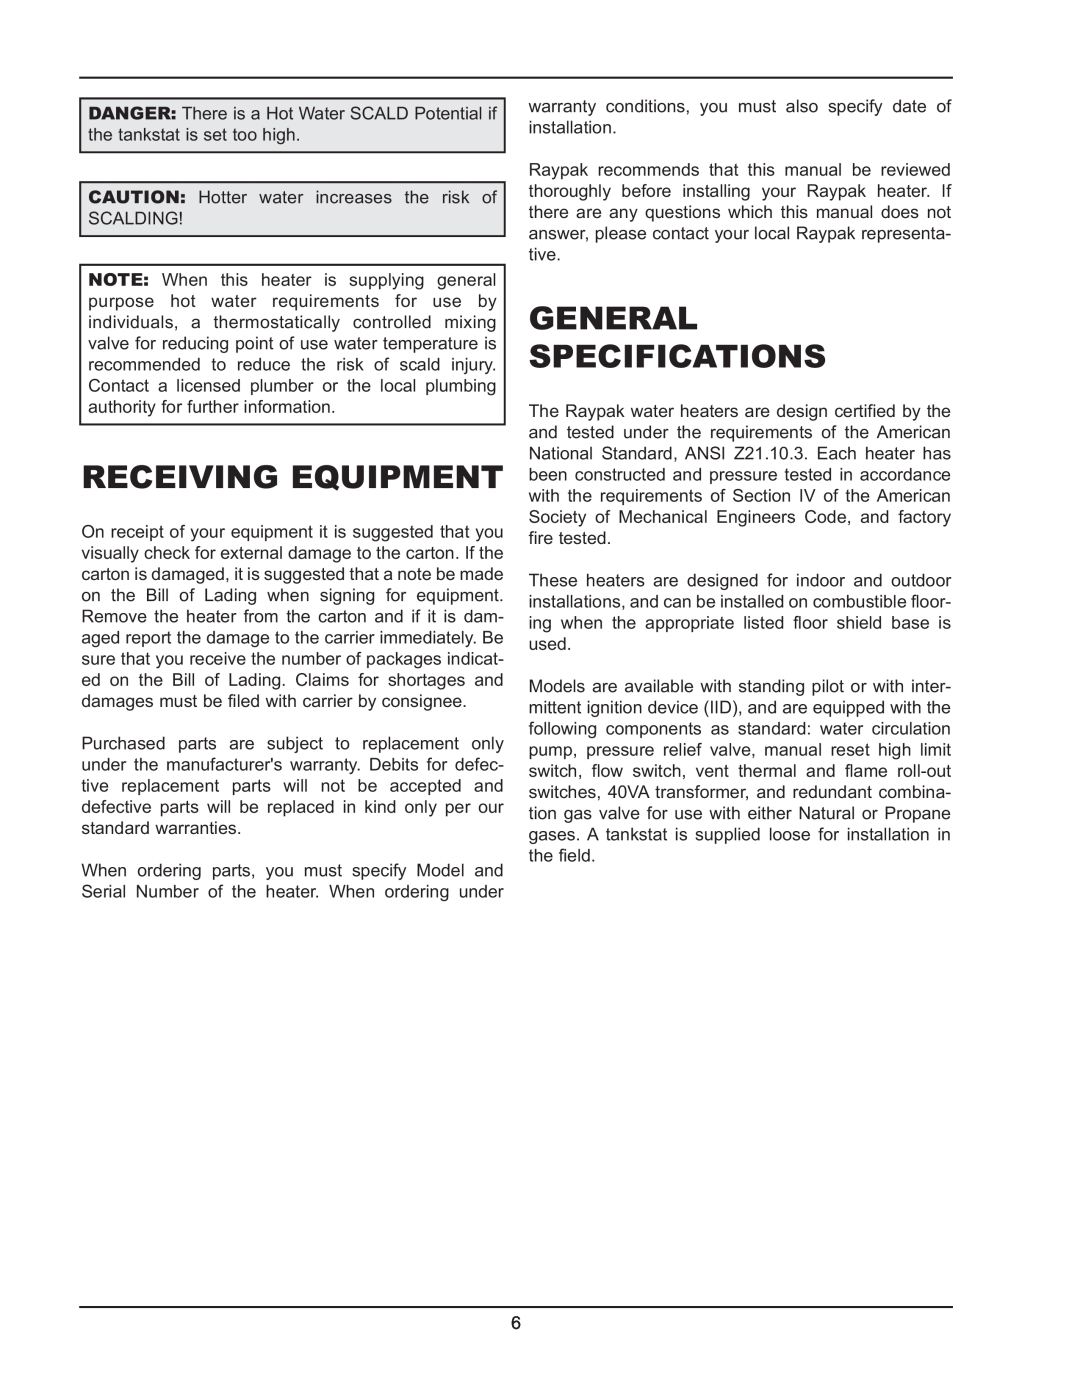 Raypak 0195A, 0135A, 0090A operating instructions Receiving Equipment, General Specifications 